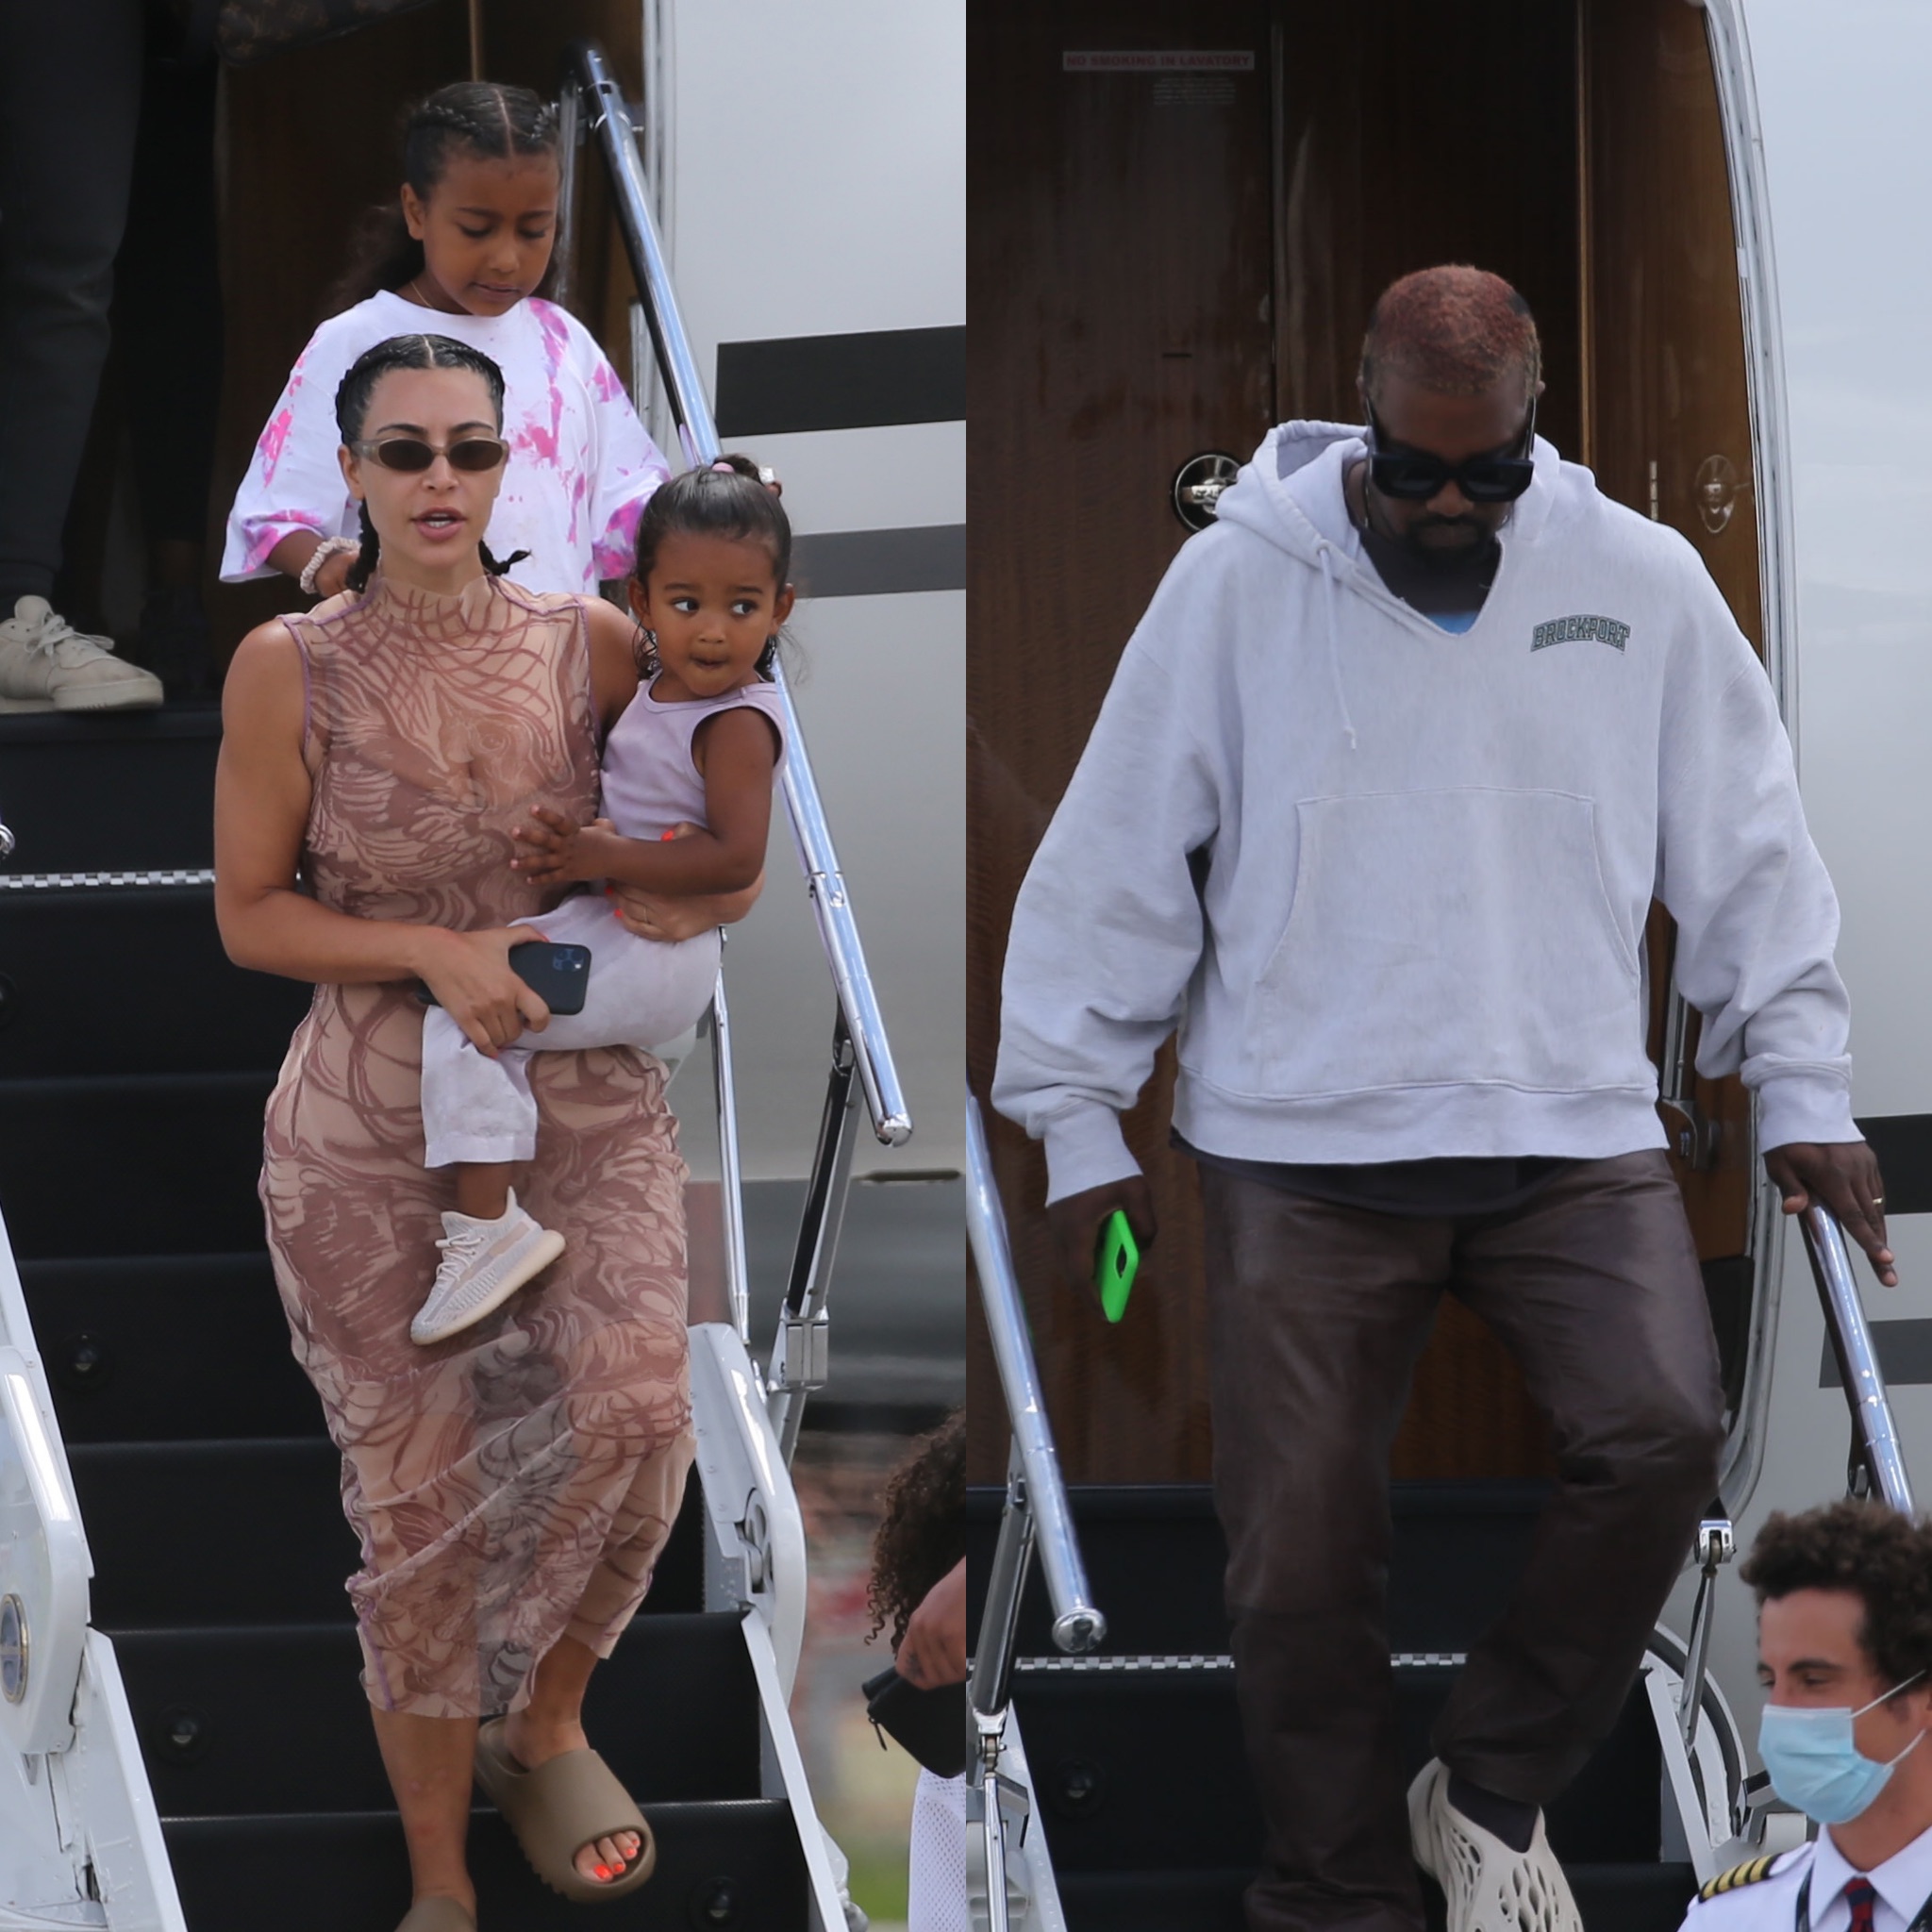 Kim Kardashian, Kanye West Return From Family Vacation Amid Drama | In Touch Weekly